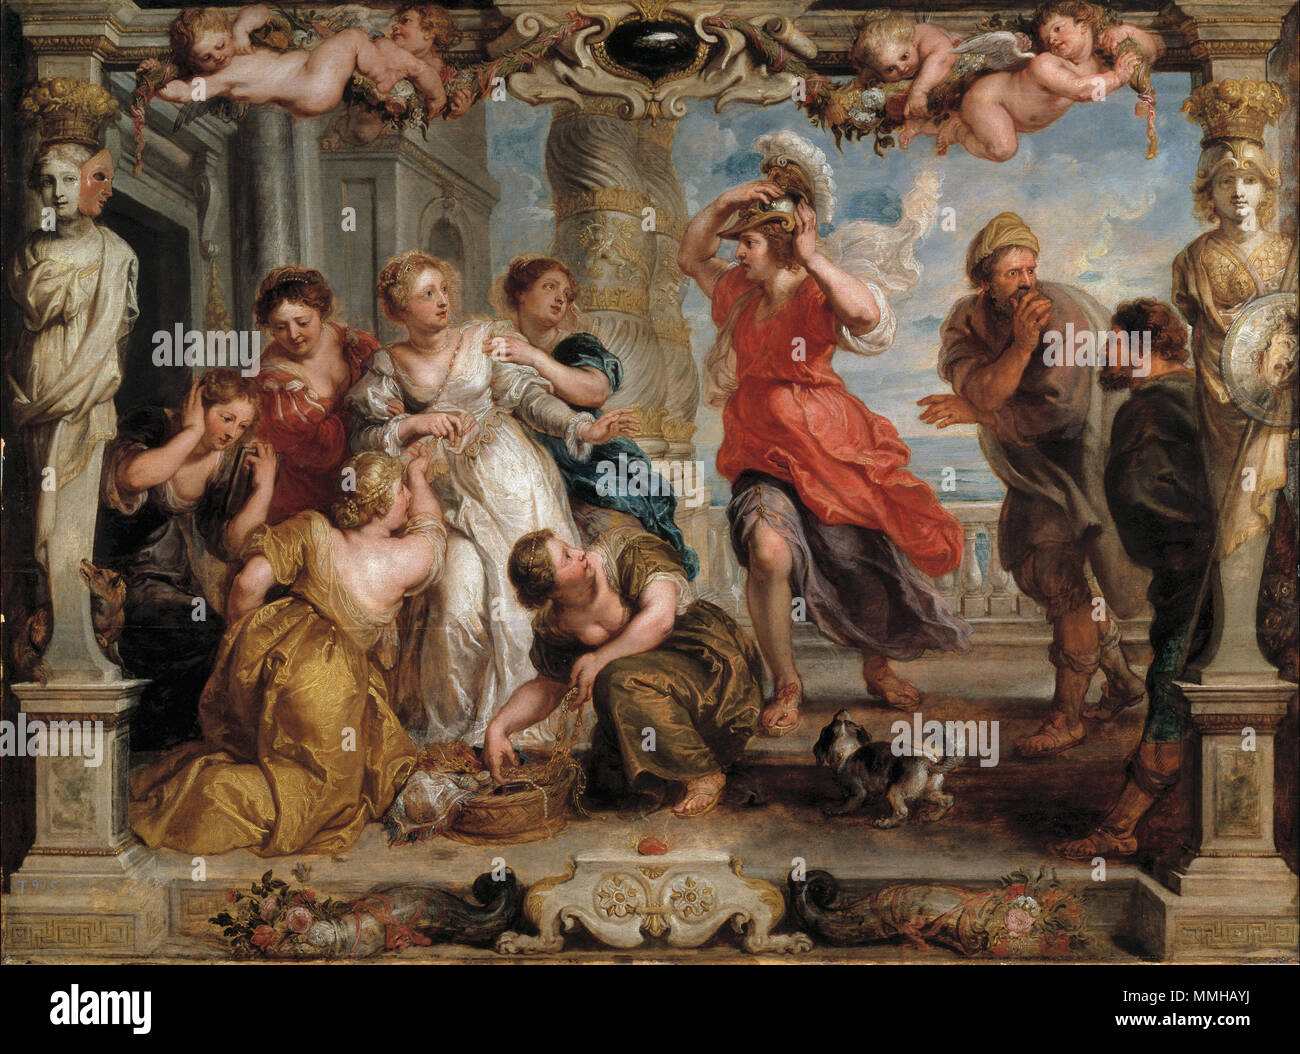 . Italiano: Achilles discovered by Ulysses among the daughters of Lycomedes - modello  . 24 January 2008, 11:01:22.   Peter Paul Rubens  (1577–1640)       Alternative names Rubens, Pierre Paul Rubens, Pieter Paul Rubens, Sir Peter Paul Rubens  Description Flemish painter, sculptor, draughtsman and printmaker  Date of birth/death 28 June 1577 30 May 1640  Location of birth/death Siegen Antwerp  Work location Antwerp (1589-1600), Mantua (9 May 1600-1608), Spain (1603), Antwerp (1608-1640), Netherlands (1612), Paris (23 May 1623-29 June 1623, 4 February 1625-9 June 1625), Calais (November 1626),  Stock Photo